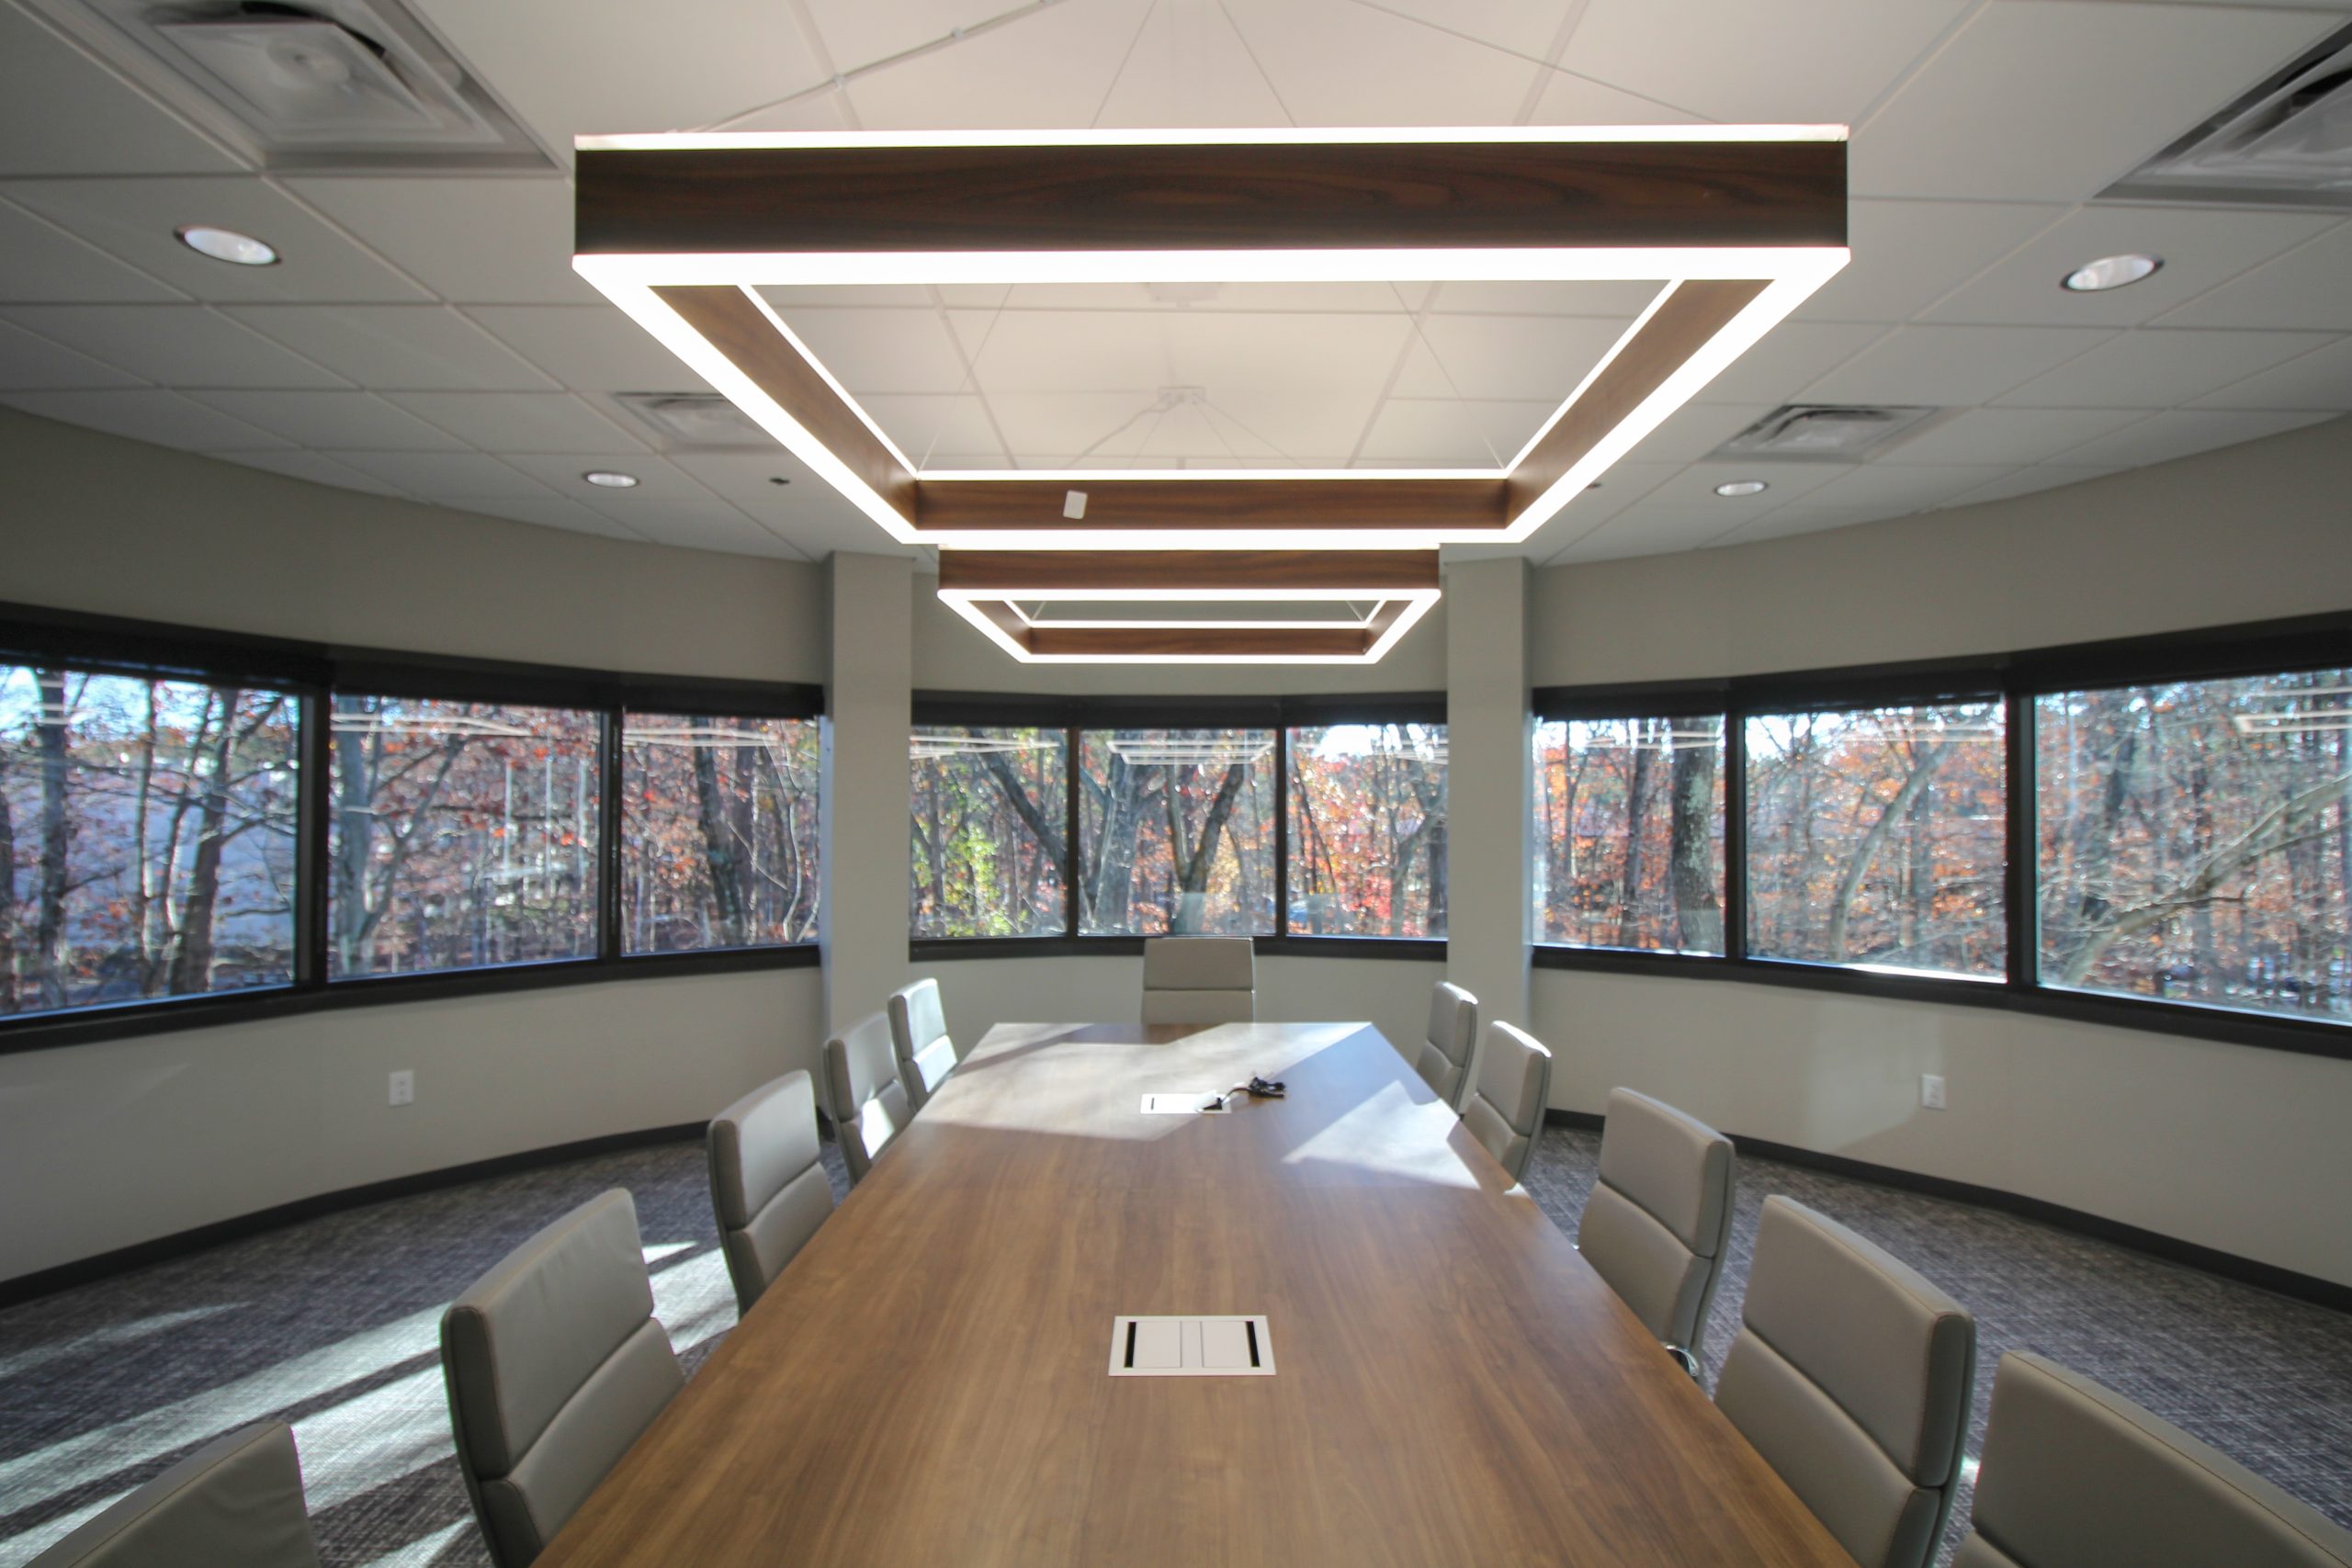 nc medical licensing board headquarters second boardroom